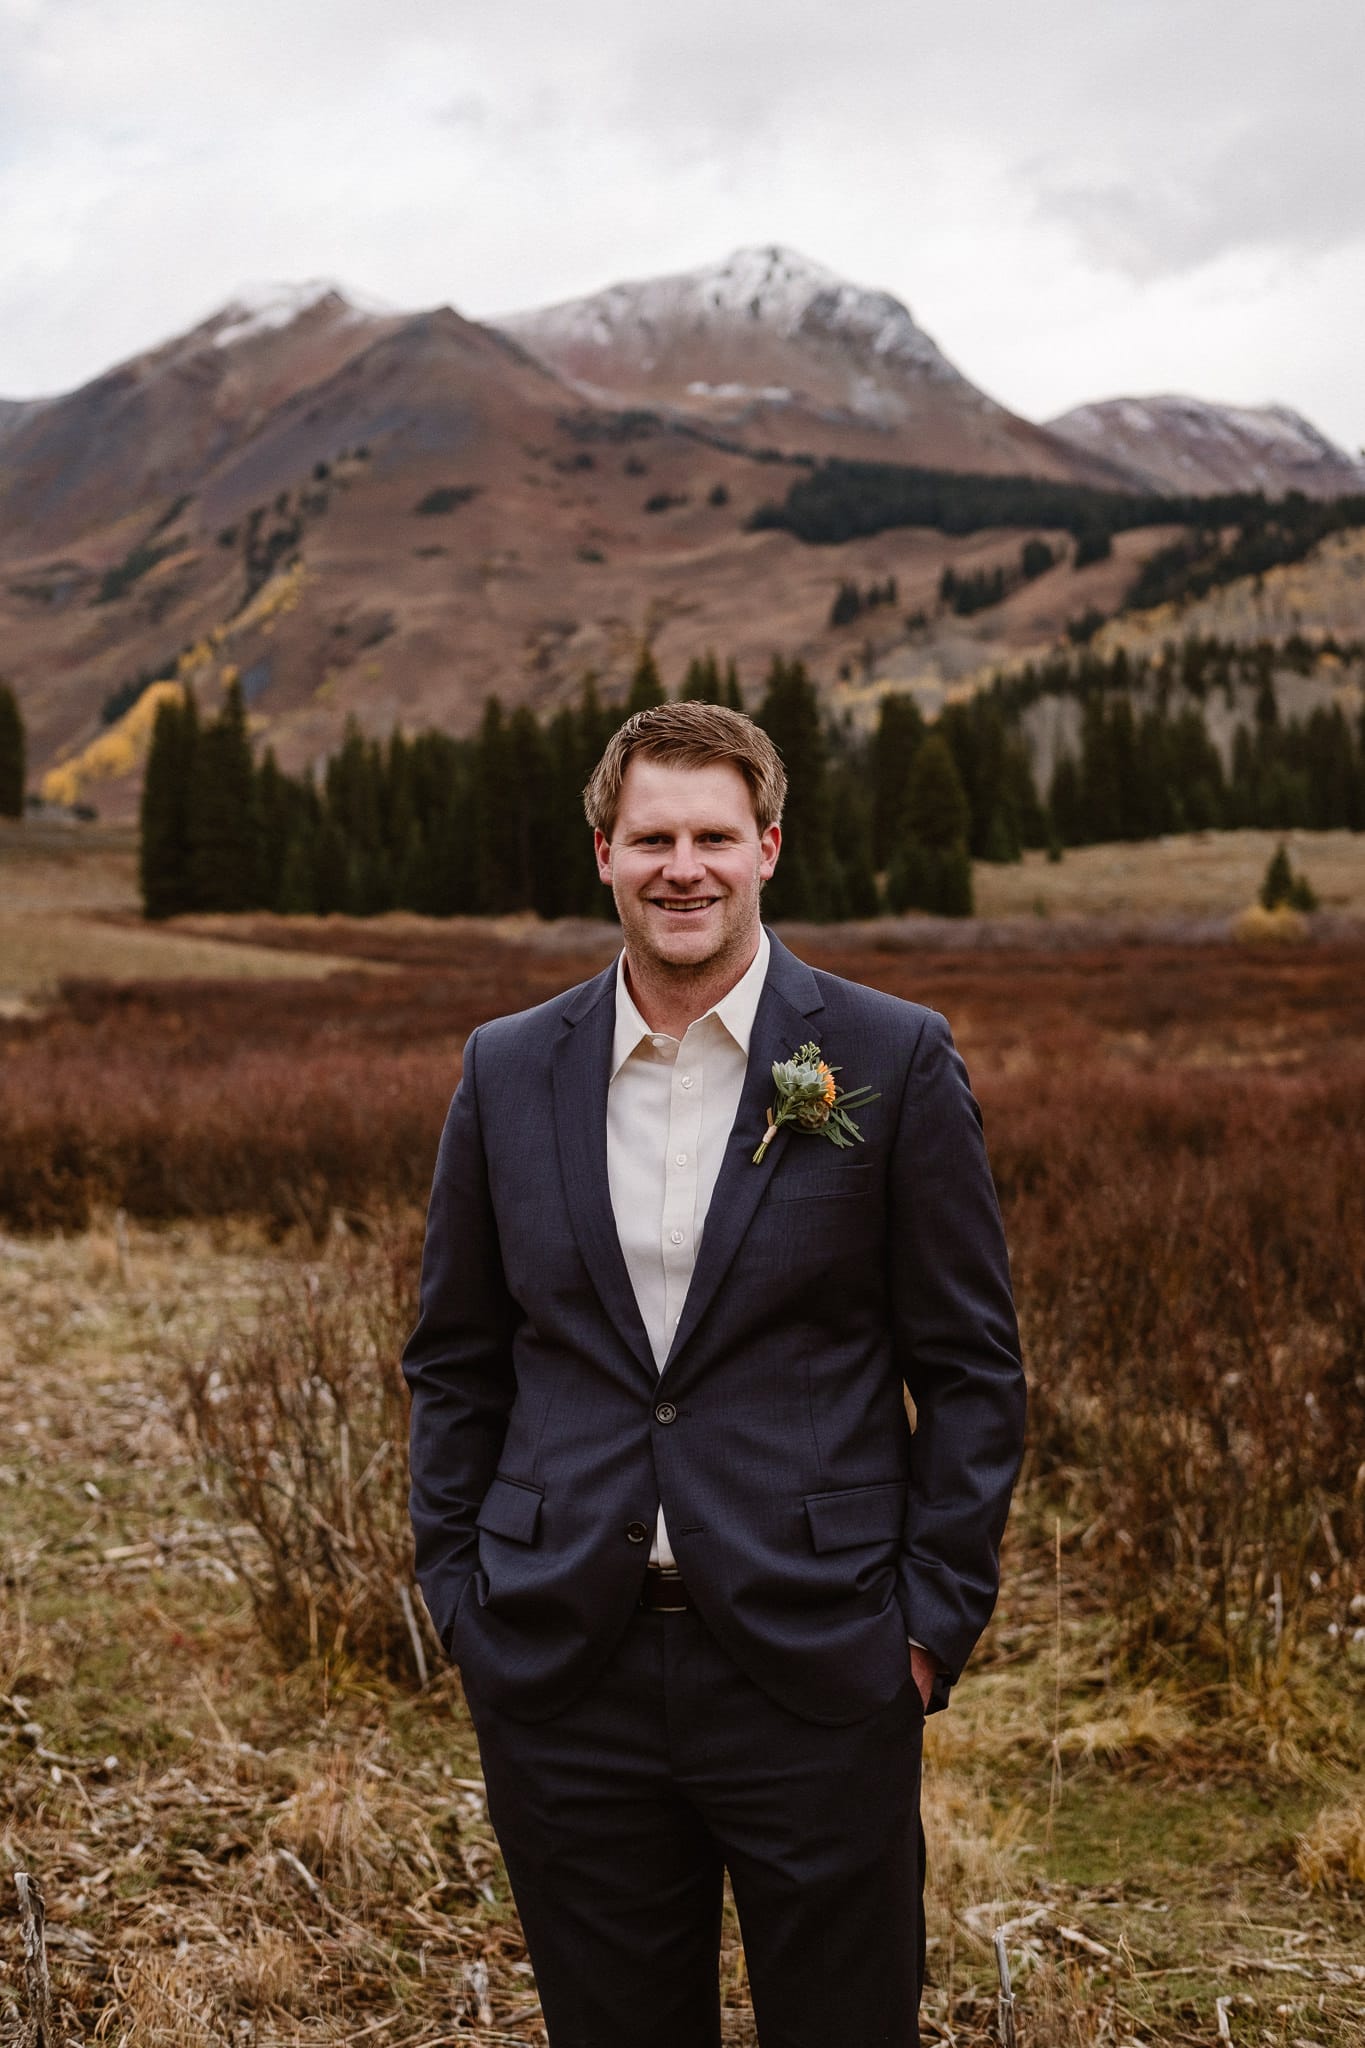 Crested Butte Wedding Photographer, Scarp Ridge Lodge intimate elopement, self solemnized elopement in Colorado, bride and groom portraits, Colorado mountain adventure wedding, groom with orange and green boutonniere by From the Ground Up Flowers